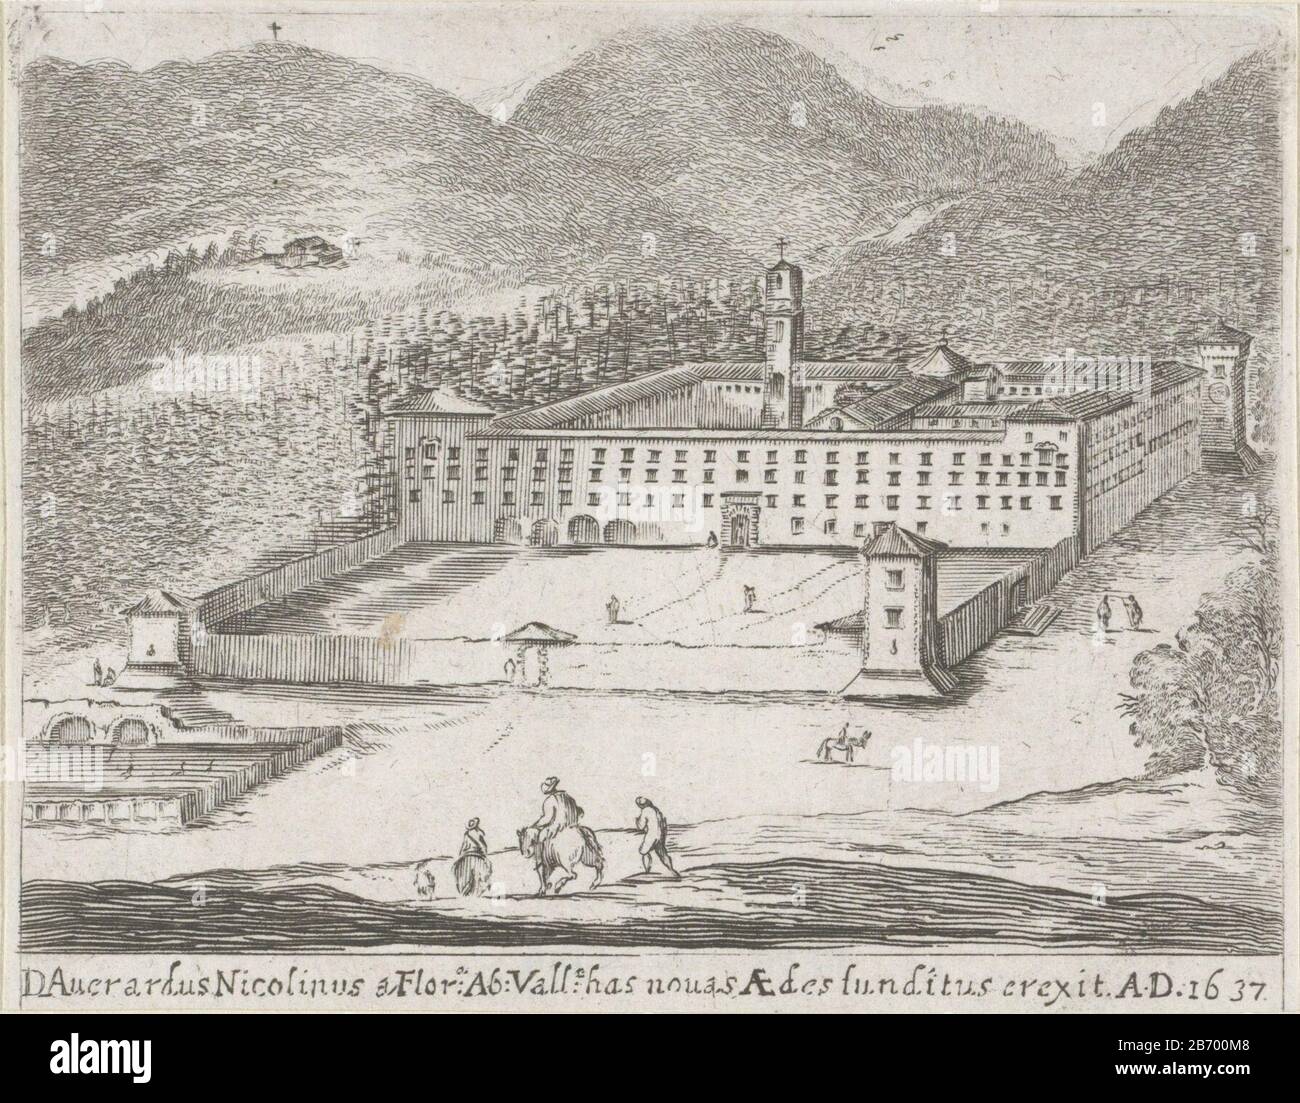 Klooster van Vallombrosa Leven van de heilige Johannes Gualbertus (serietitel) View of the monastery Vallombrosa (Abbazia di Vallombrosa) in the seventeenth century. The monastery was founded by Saint John Gualbert in 1038. Manufacturer : printmaker: Stefano della Bella Dated: 1637 Physical features: etching material: paper Technique: etching Dimensions: sheet: H 103 mm (Inner cut plate edge.) × W 131 mm (Inner cut sheet edge. ) Comments Print out a series of five prints on the life of St. John Gualbertus. Subject: cloisters  monastery Stock Photo